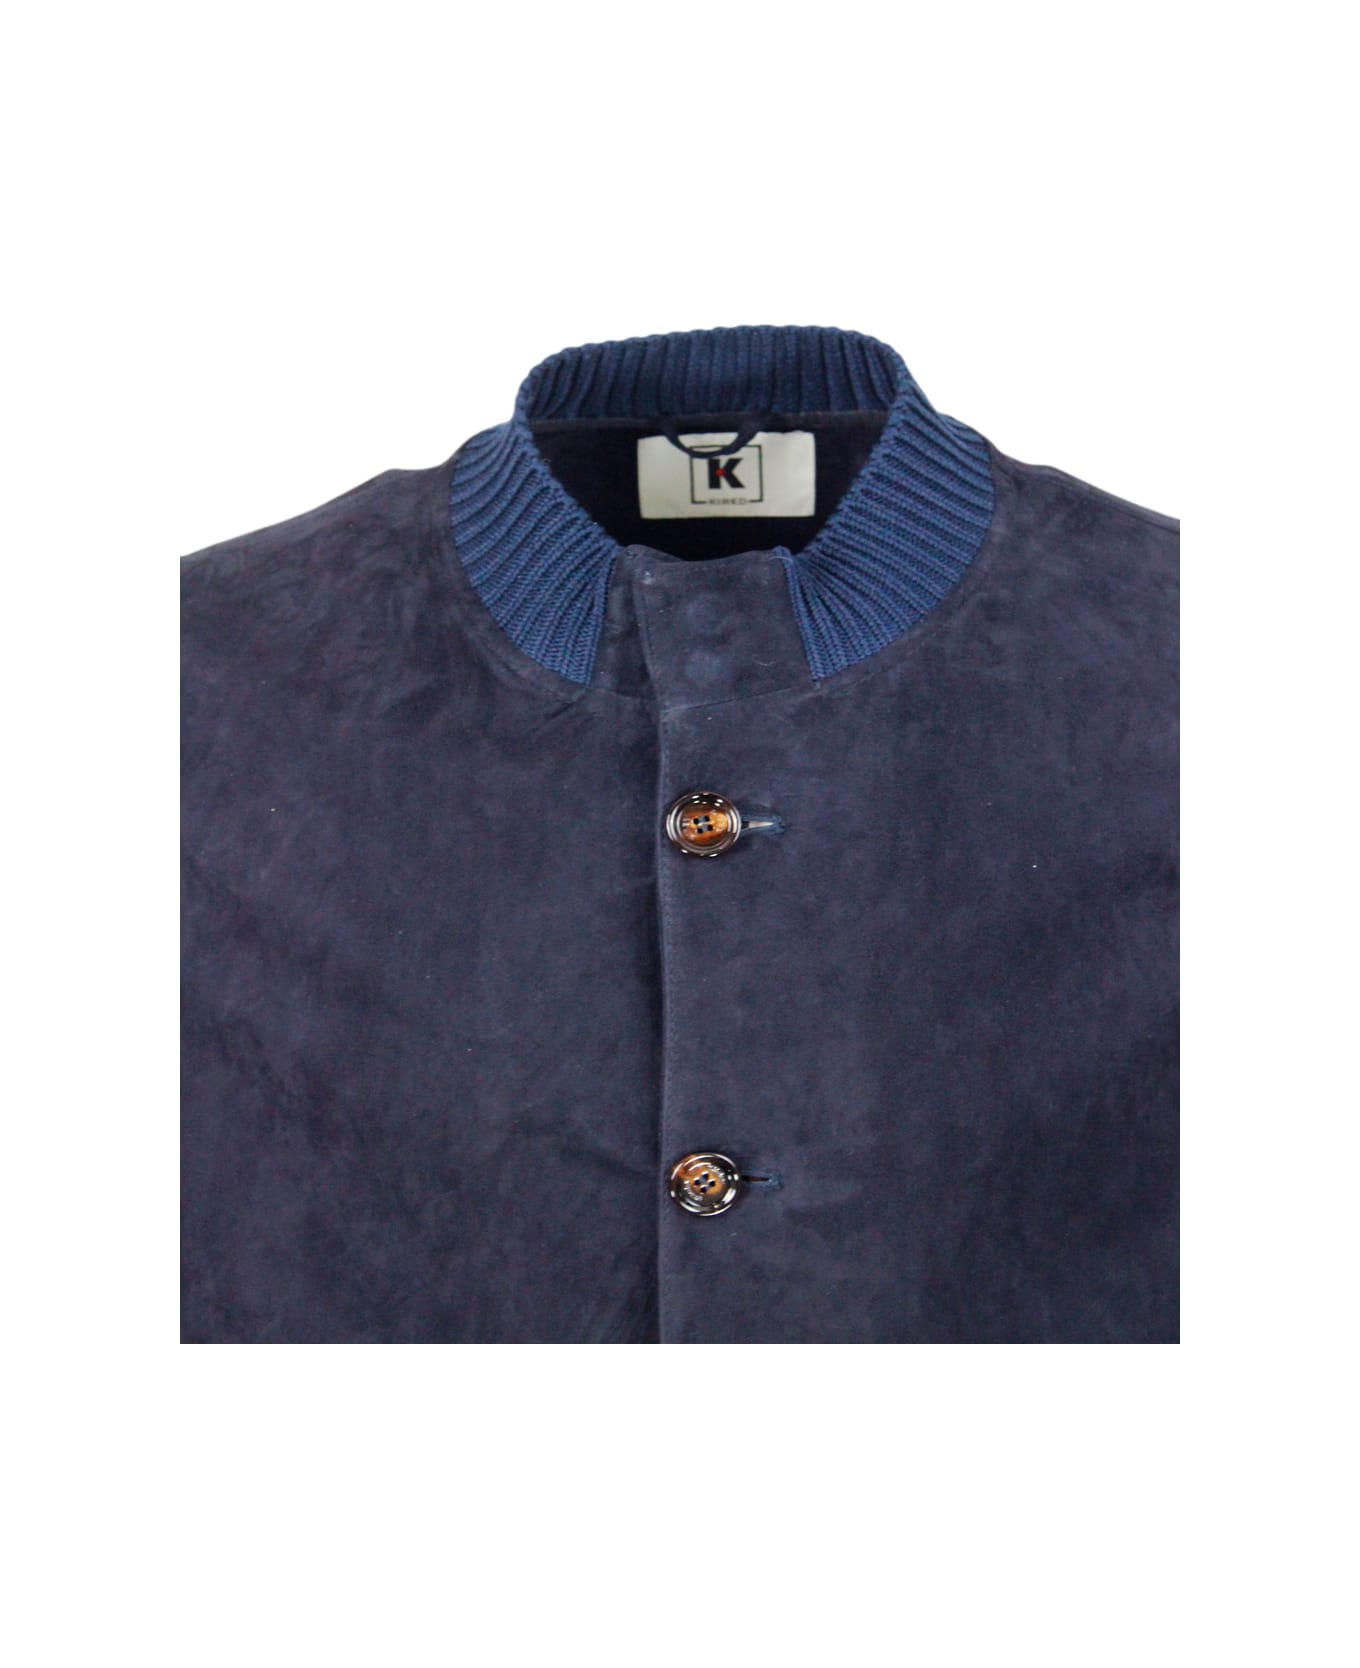 Kired Igor Jacket In Fine Unlined Light Lambskin Suede With Button Closure And Knitted Finishes - Blu